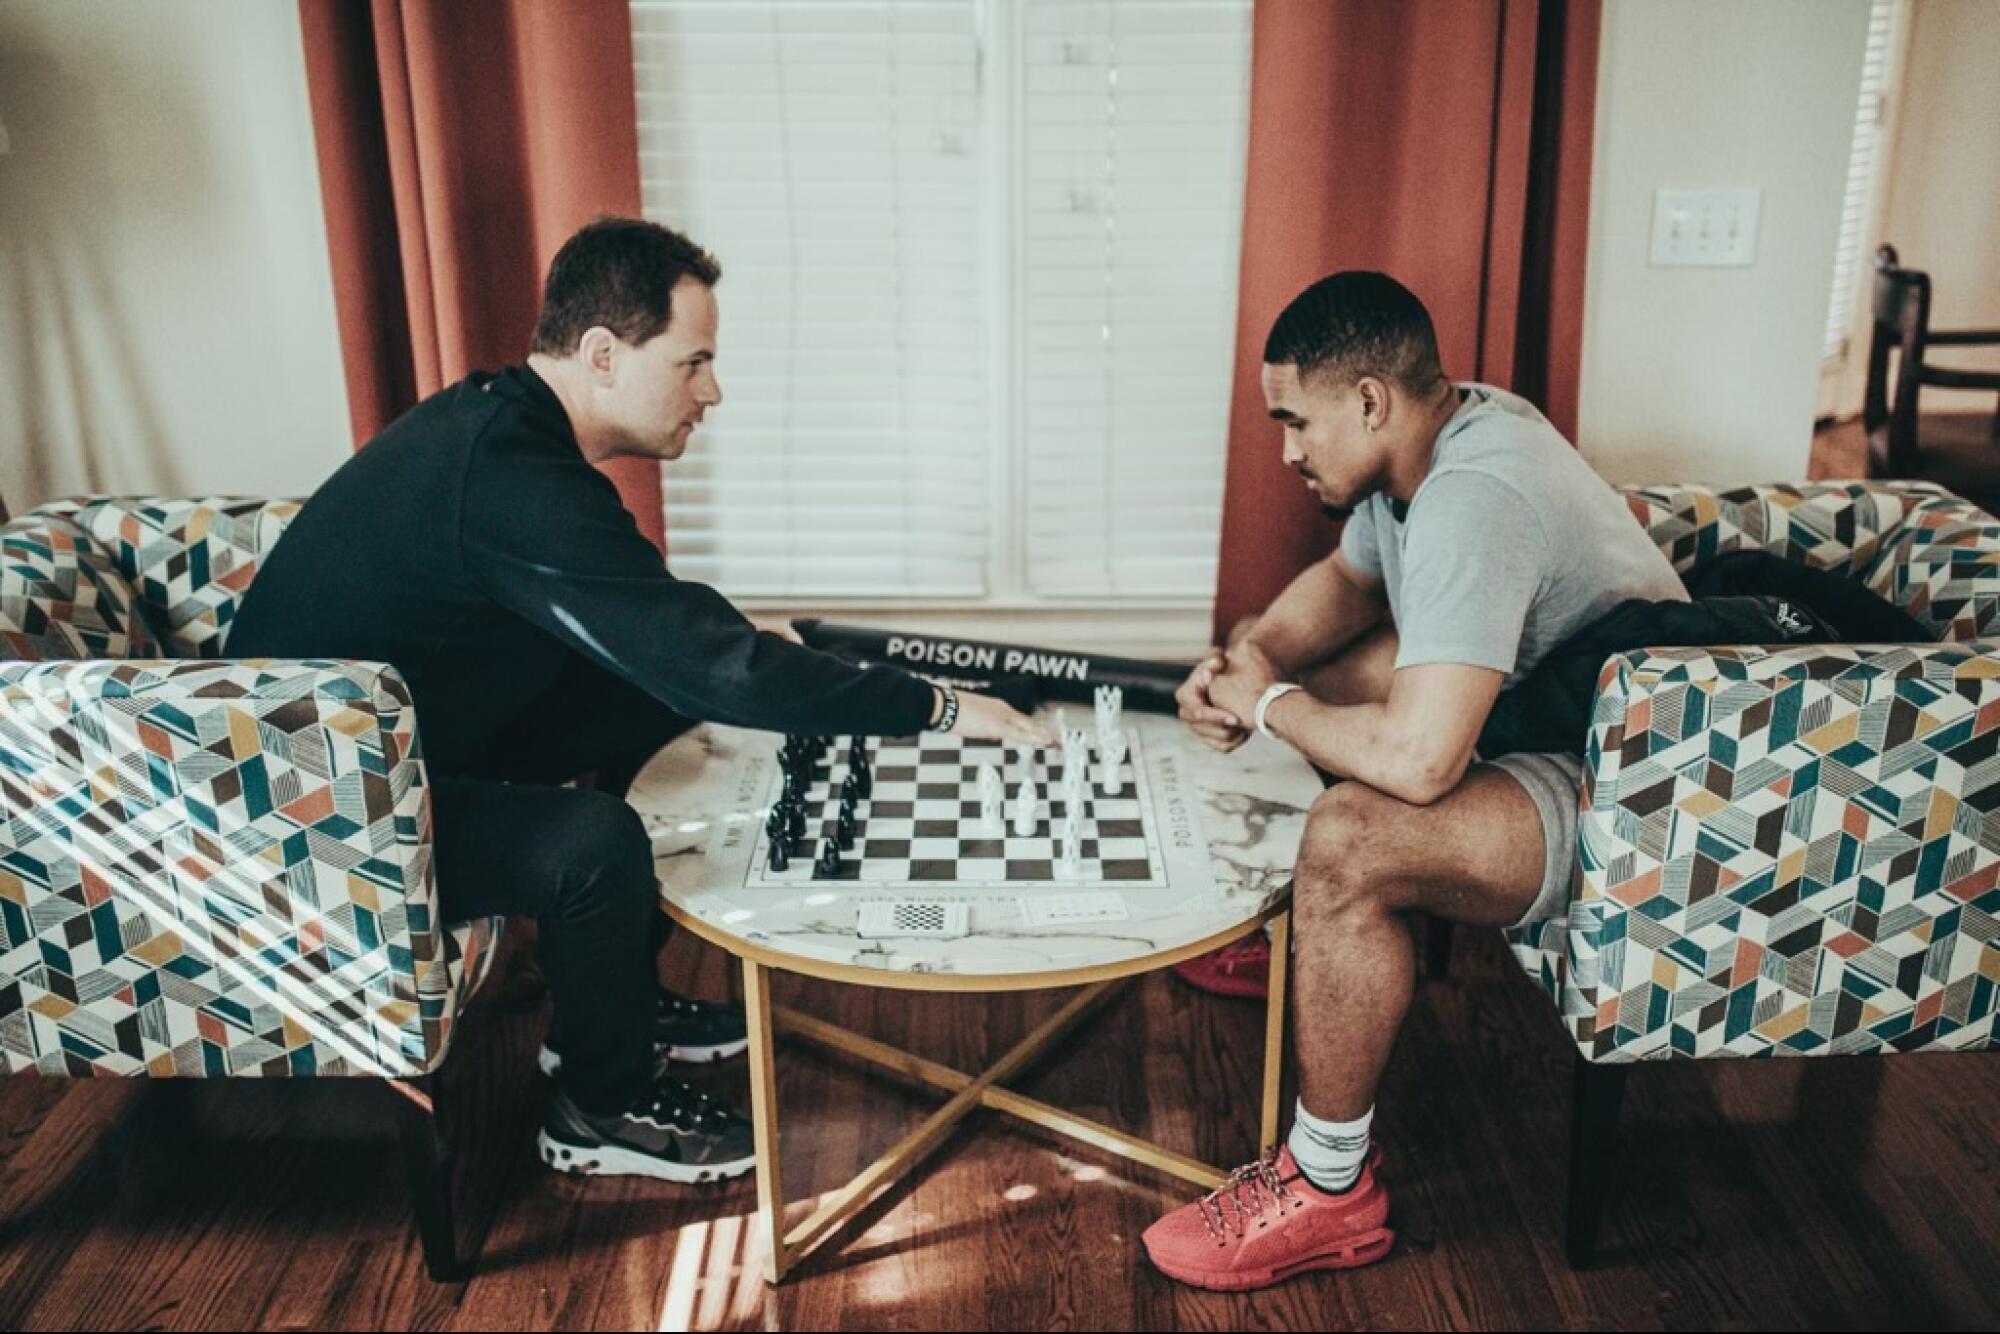 Seth Makowsky, left, plays chess with Jalen Hurts, current quarterback of the Philadelphia Eagles.